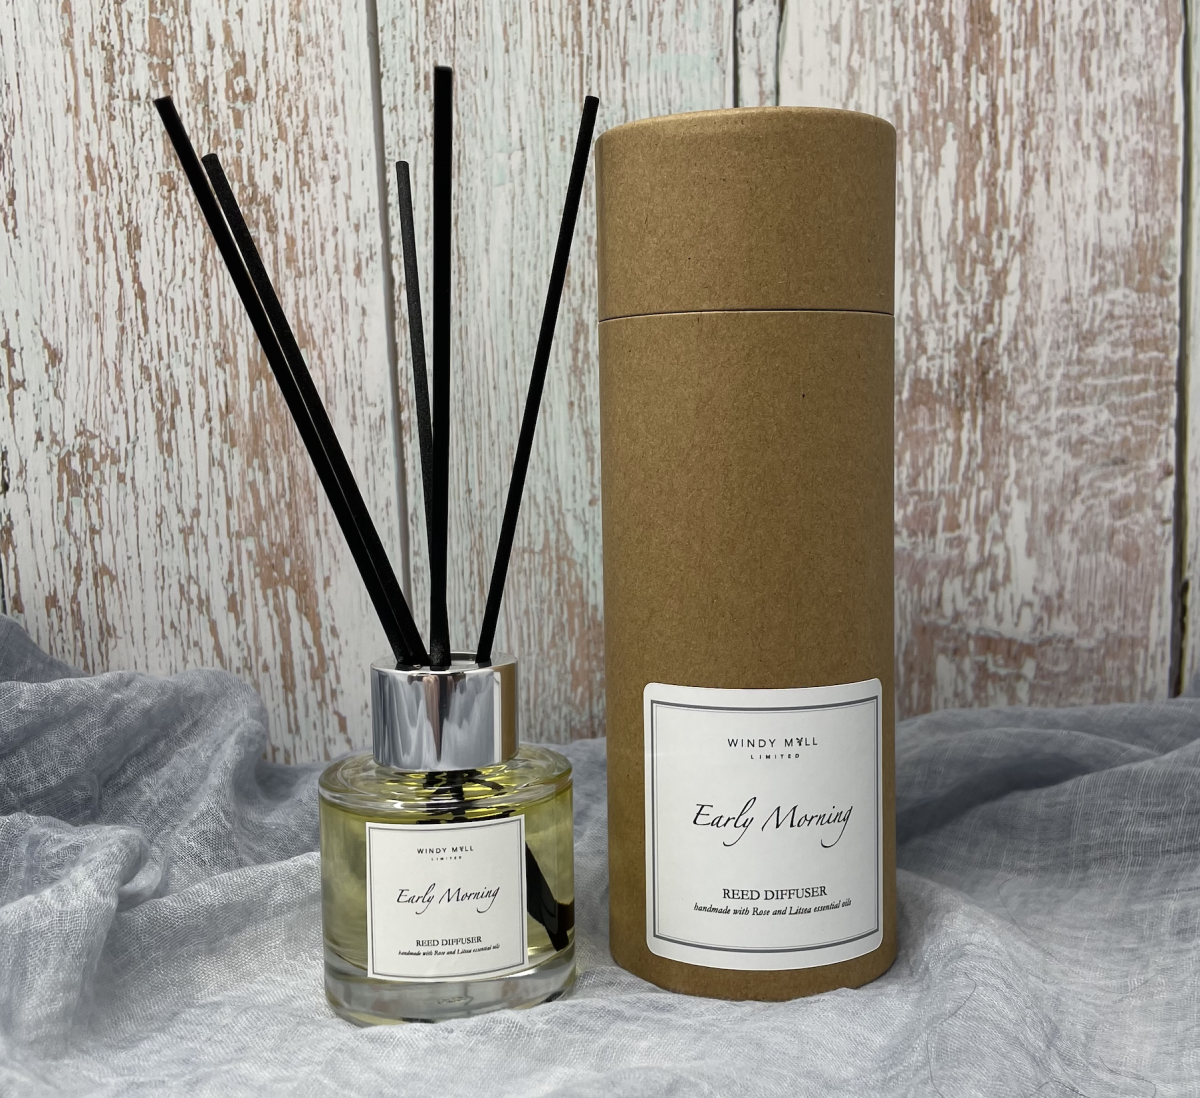 Winter Warmer – Reed Diffuser containing Essential Oils at Henley Circle Online Shop